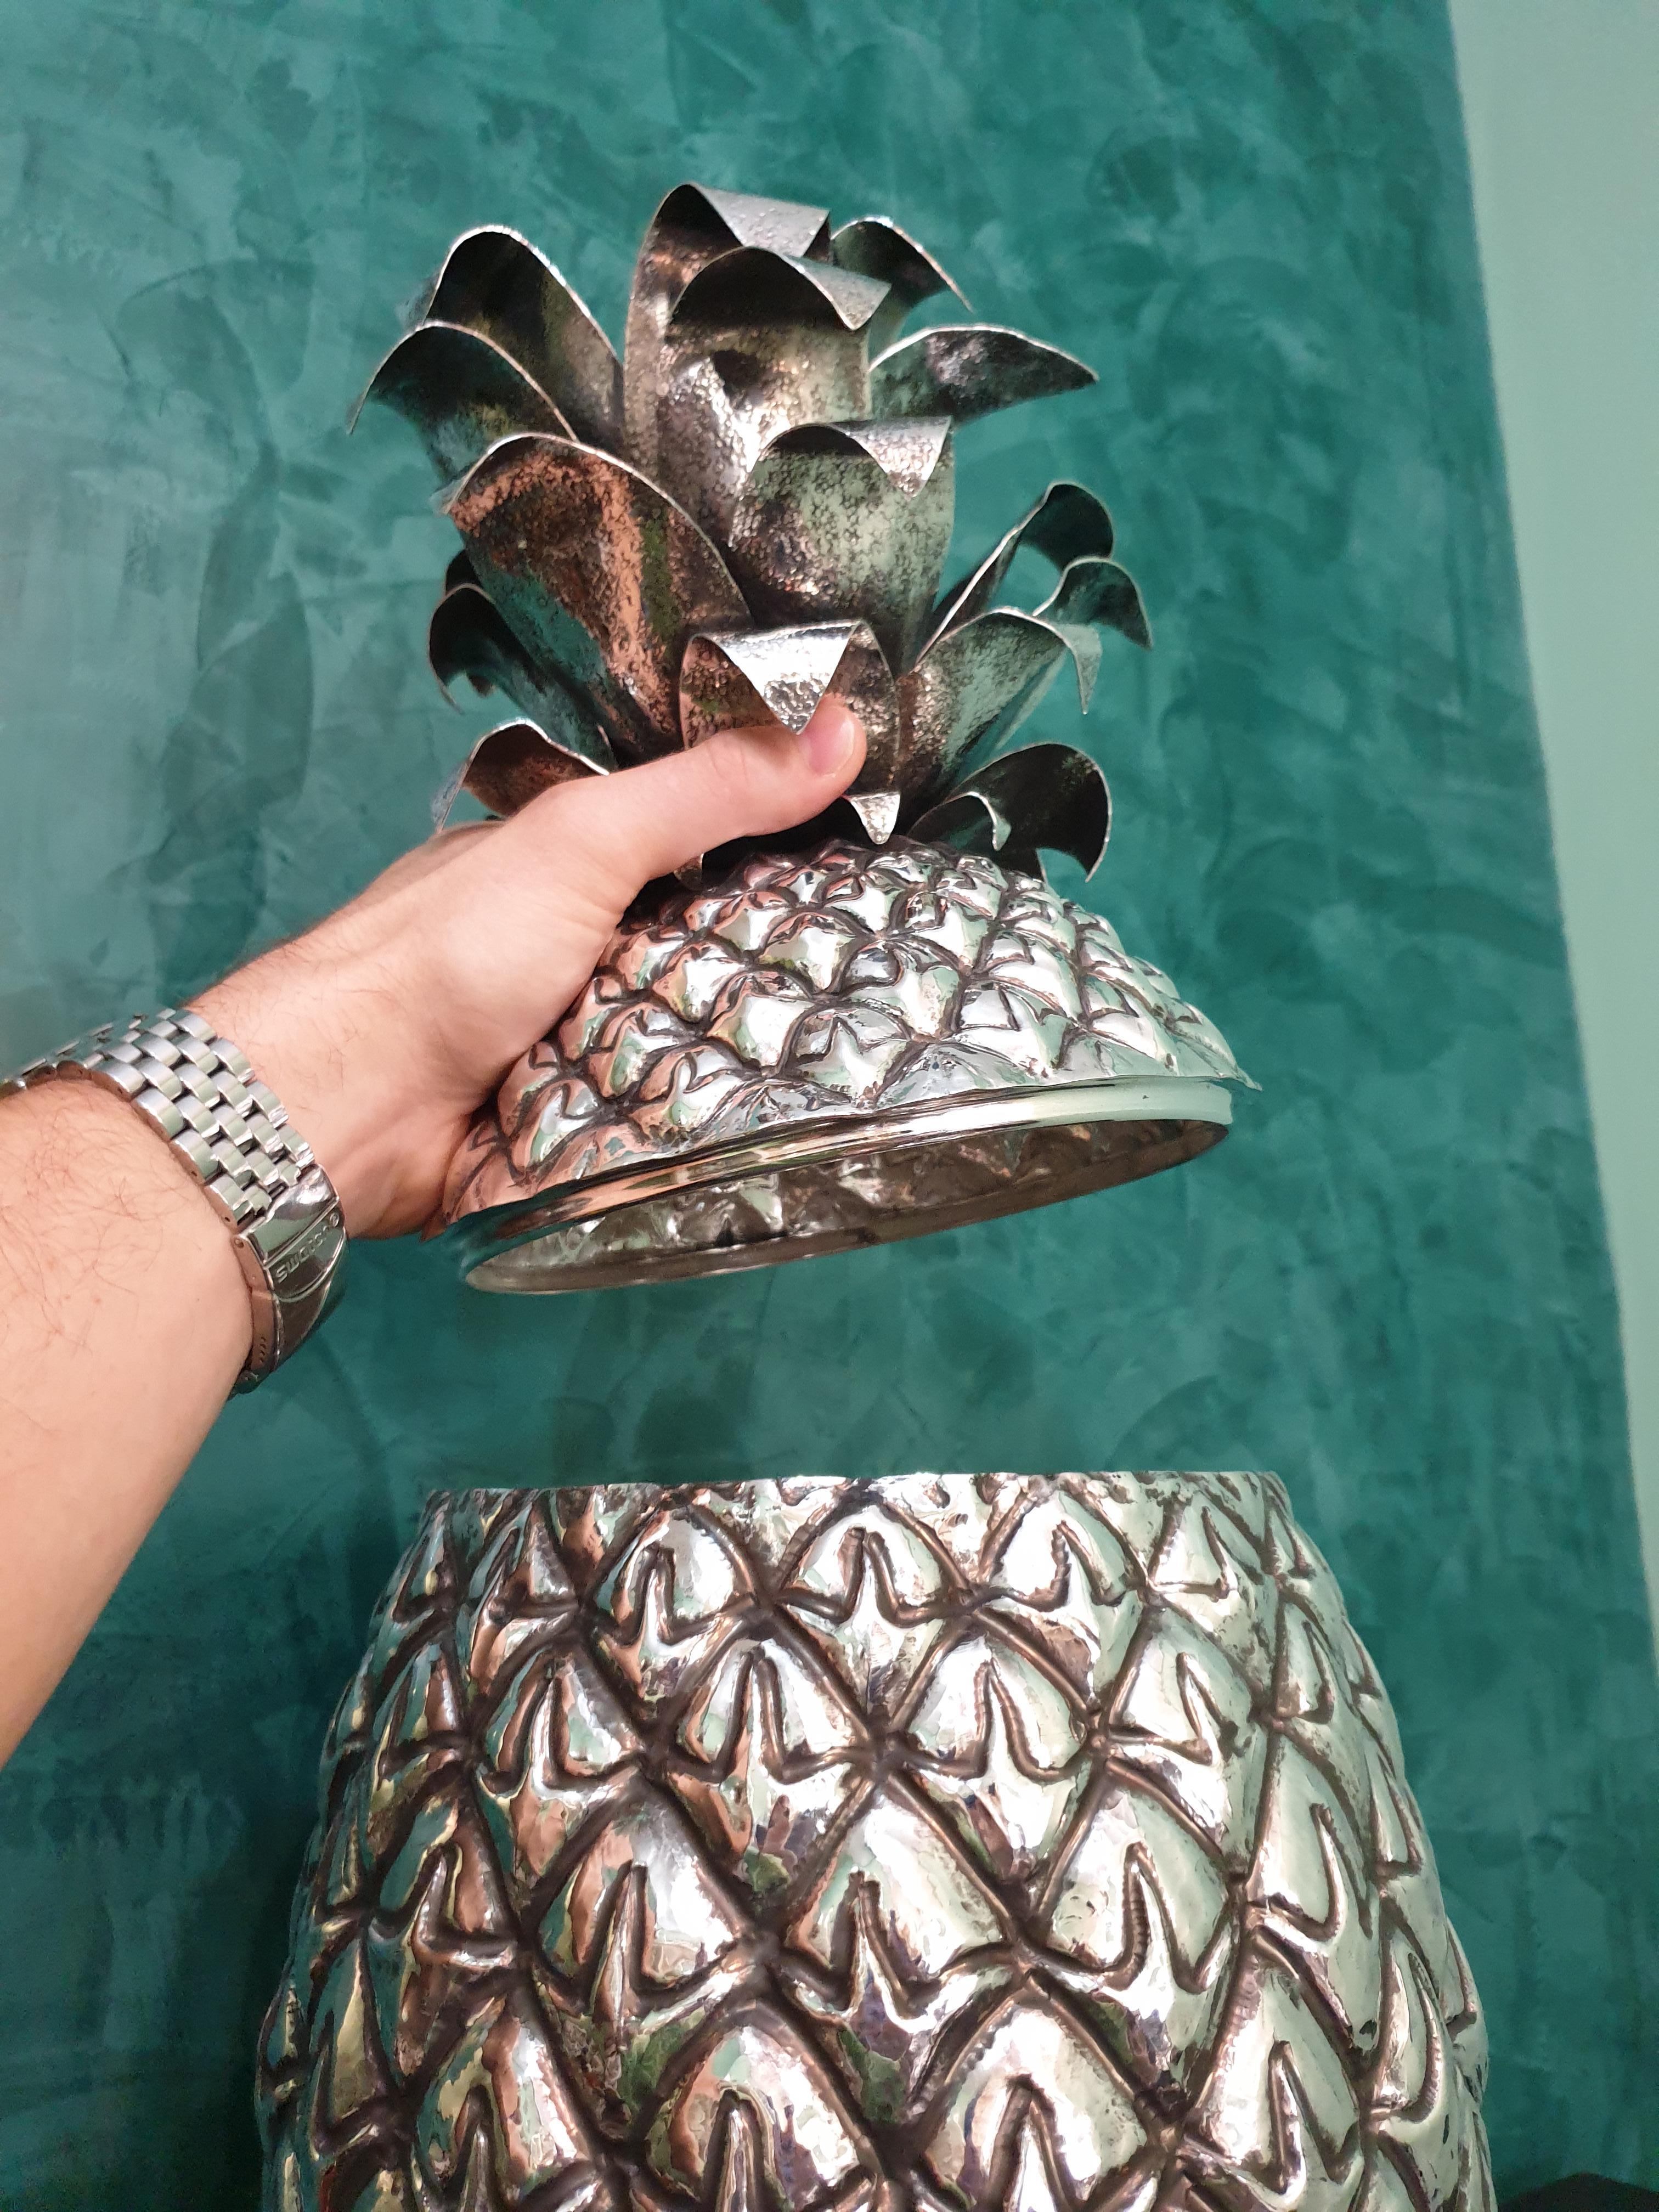 Embossed 20th Century Silver Pineapple Vase Engraved by Hand Milan Italy, 1934-1944 For Sale